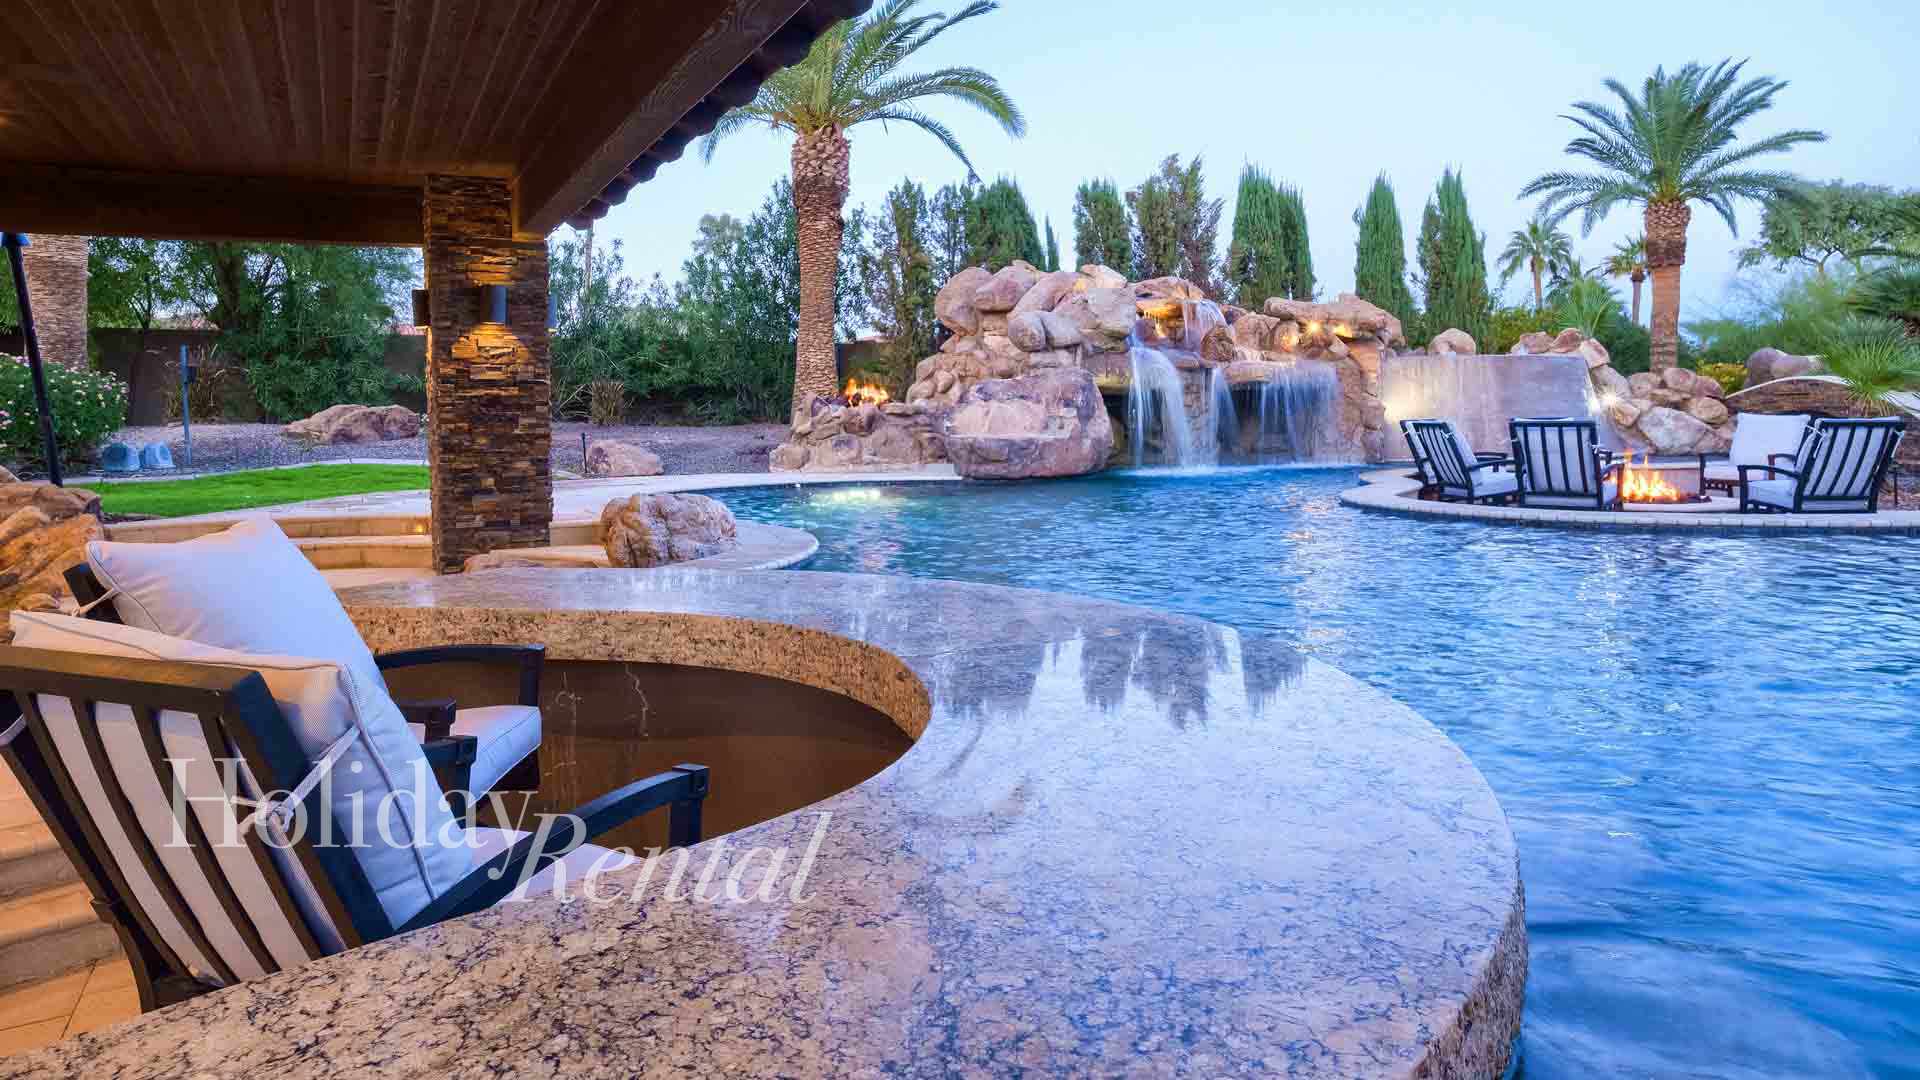 Sip on a drink at the swim up bar as you float along the lazy river, taking in the sights and sounds of the waterfall and fire pit in the distance